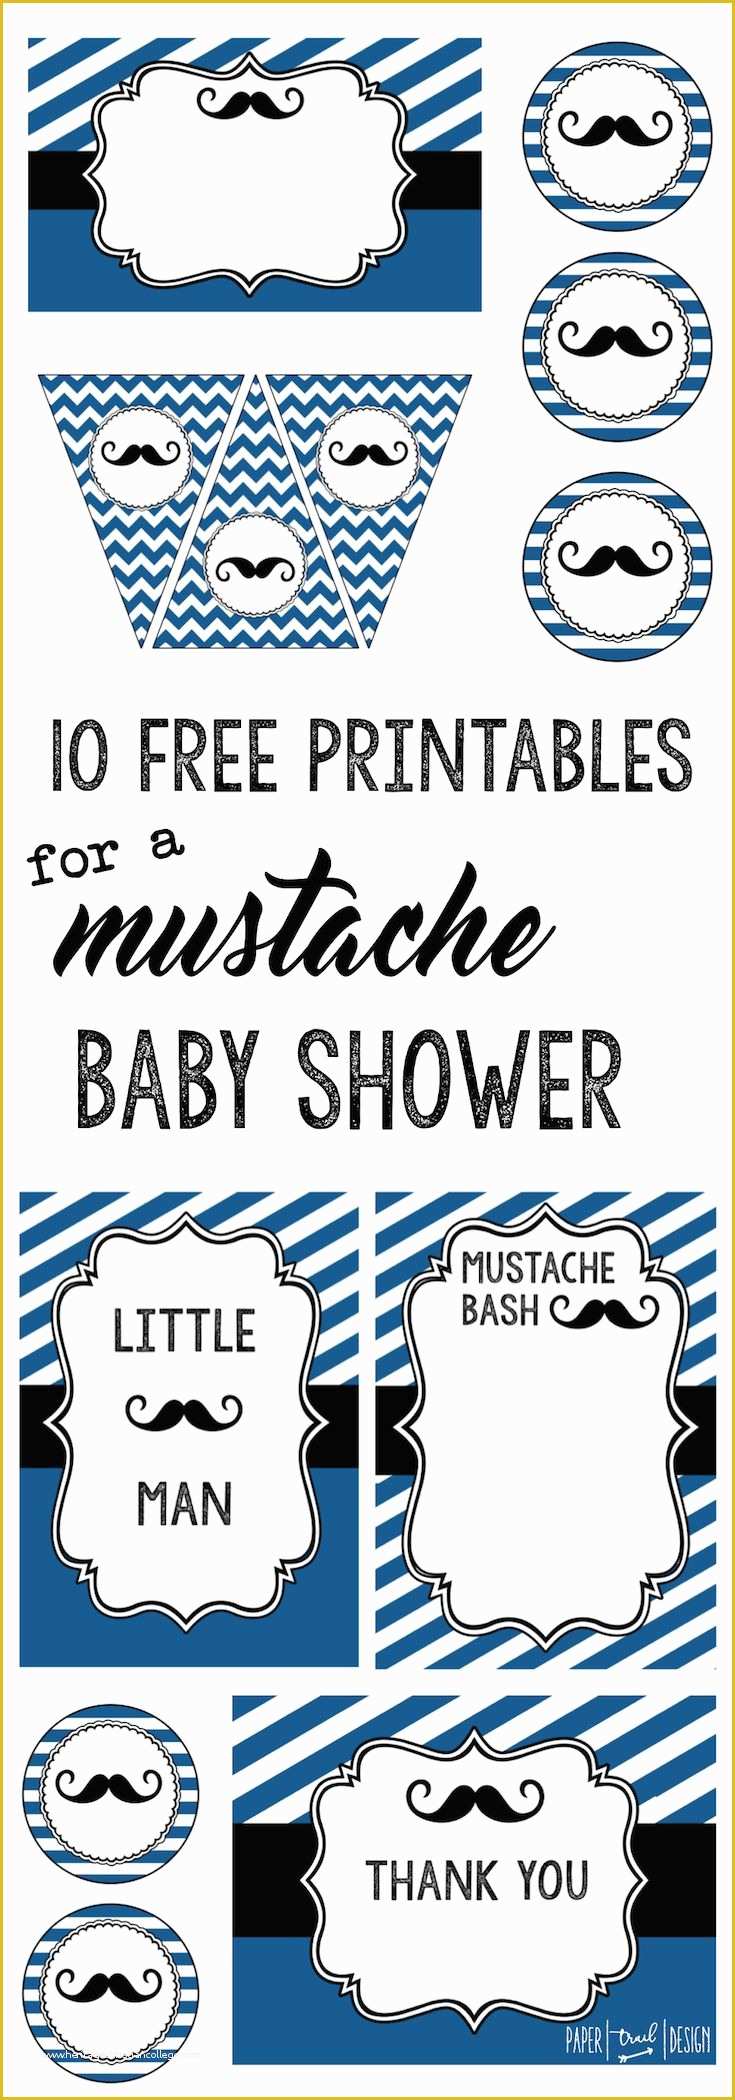 Mustache Baby Shower Invitations Free Templates Of Mustache Party 10 Free Printables